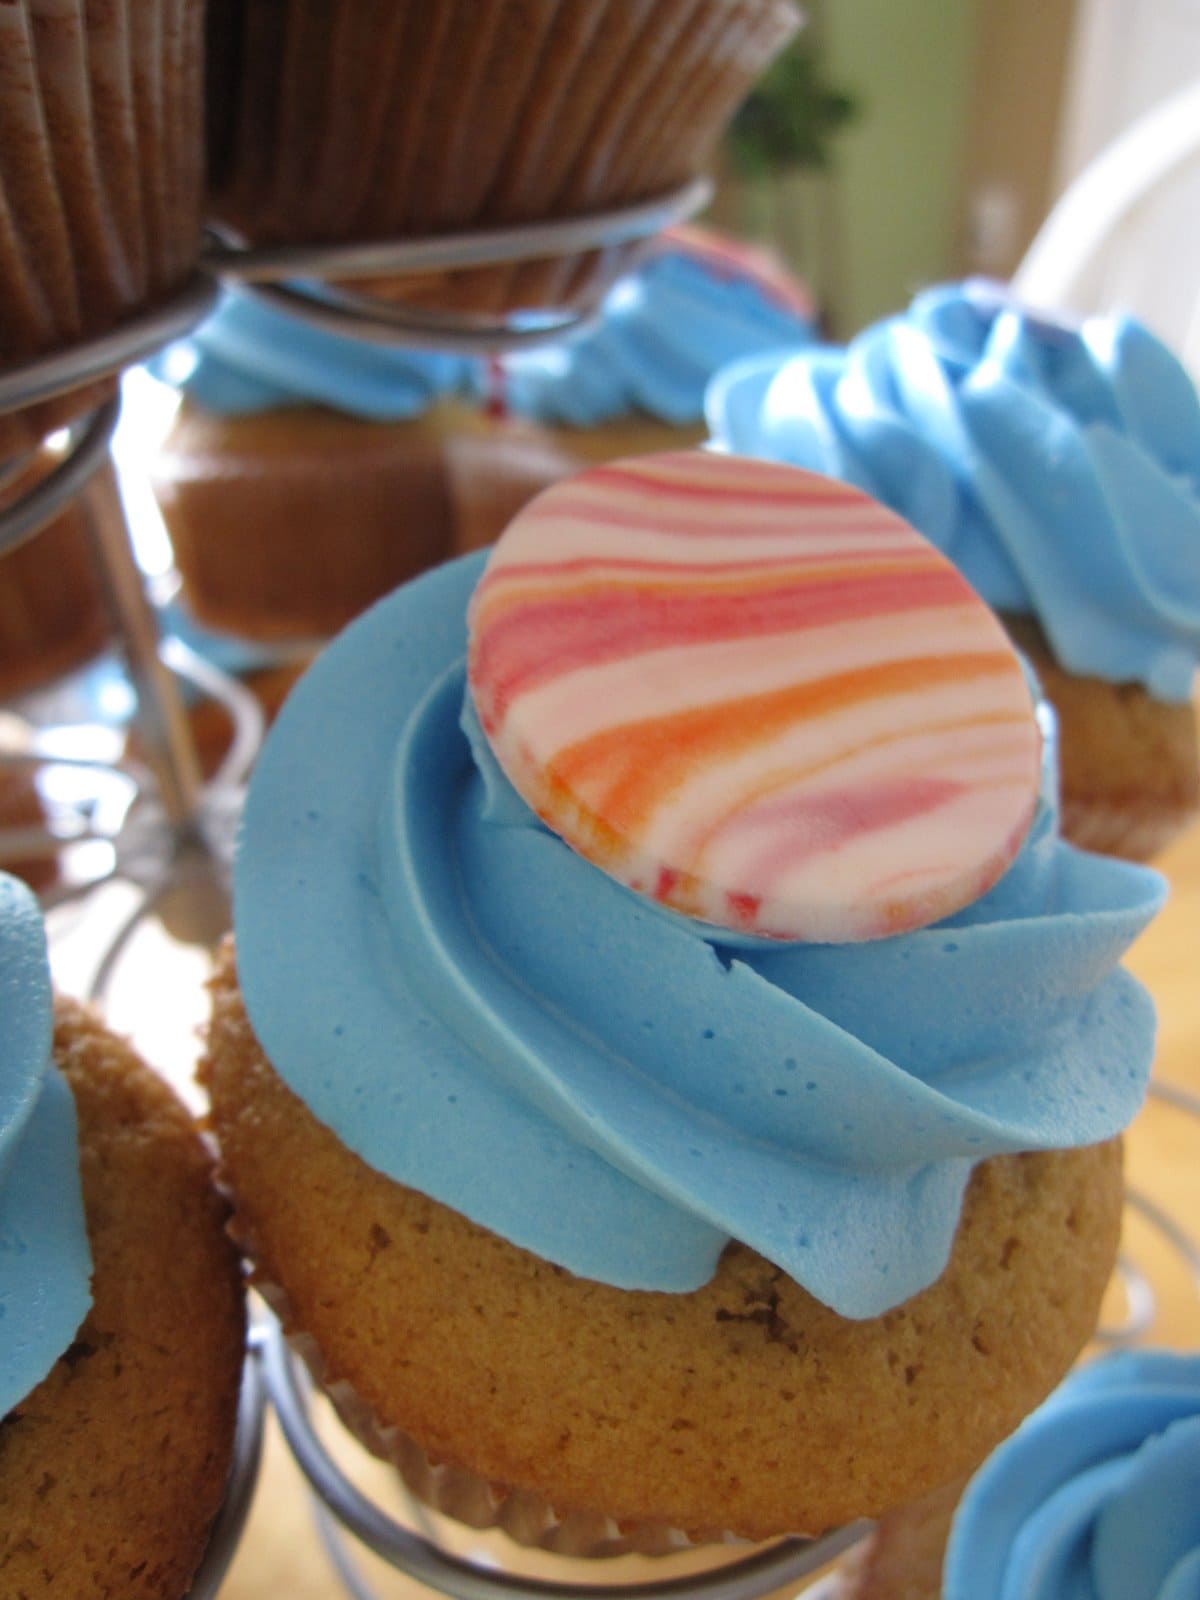 Close-up of a blue frosted cupcake with a colorful disc on top